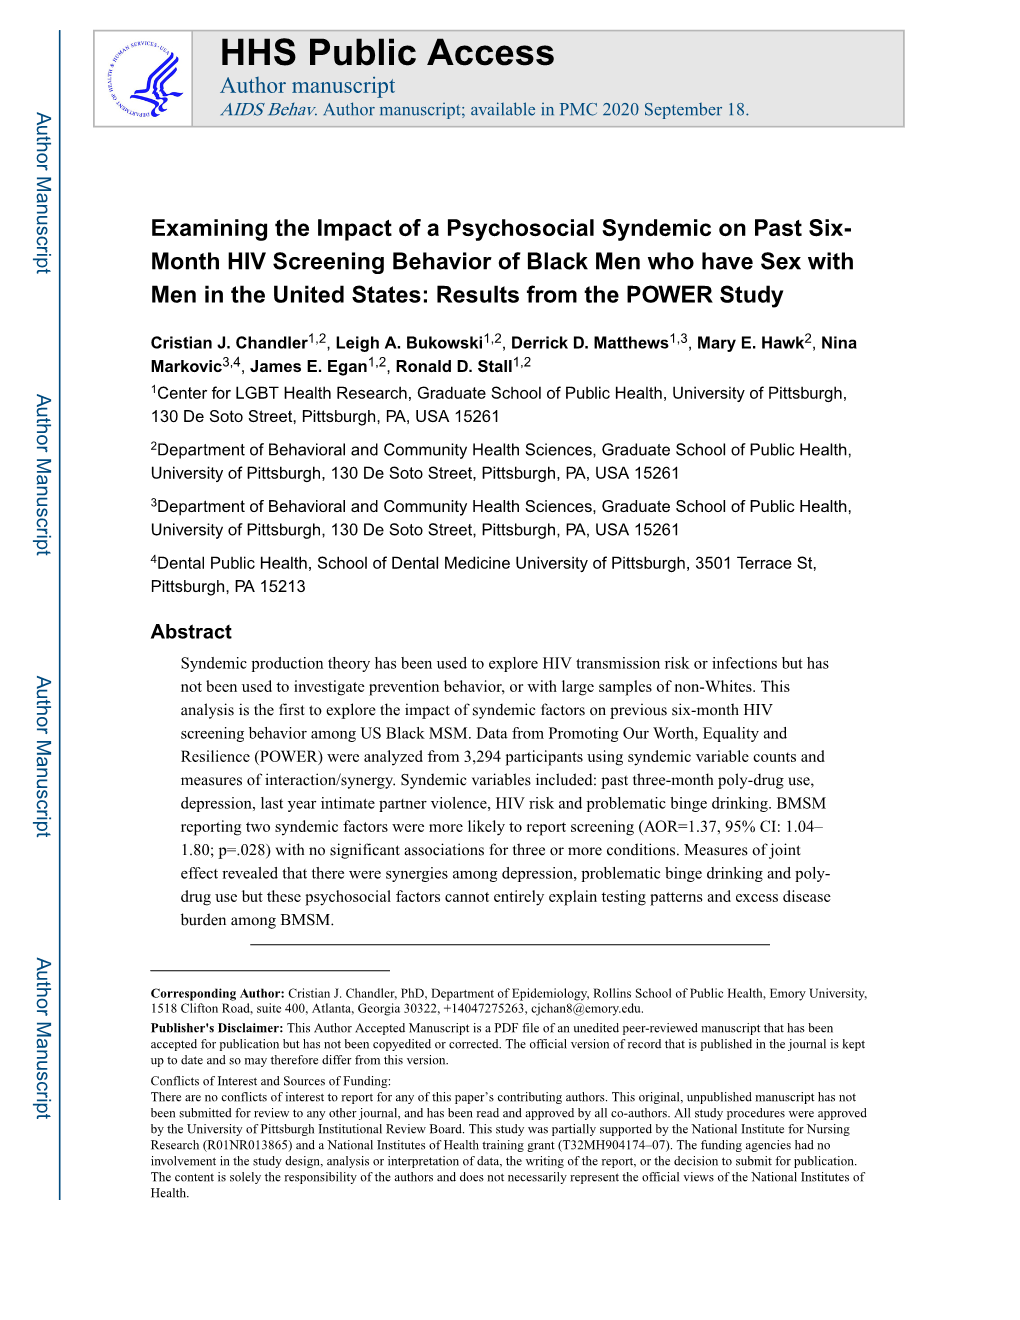 Examining the Impact of a Psychosocial Syndemic on Past Six